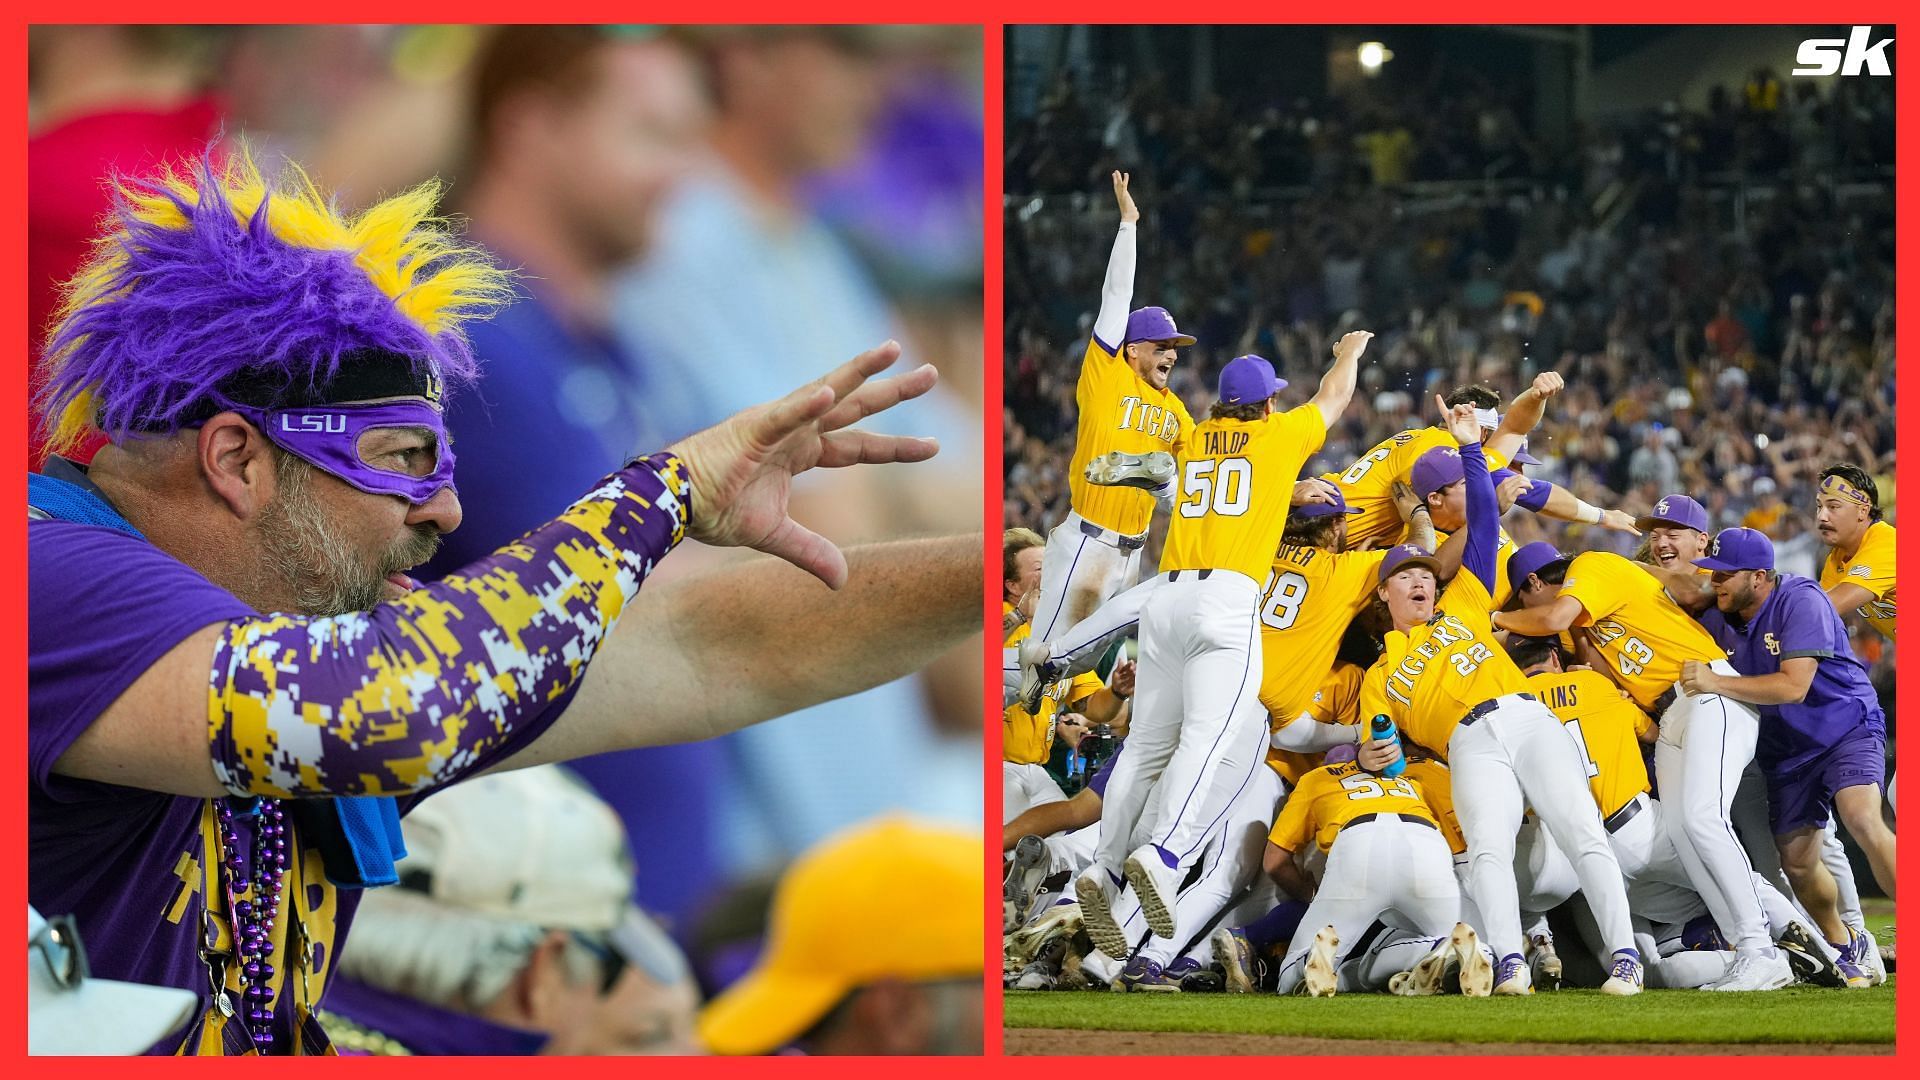 The LSU Tigers celebrate after winning the NCAA College World Series baseball finals against the Florida Gators